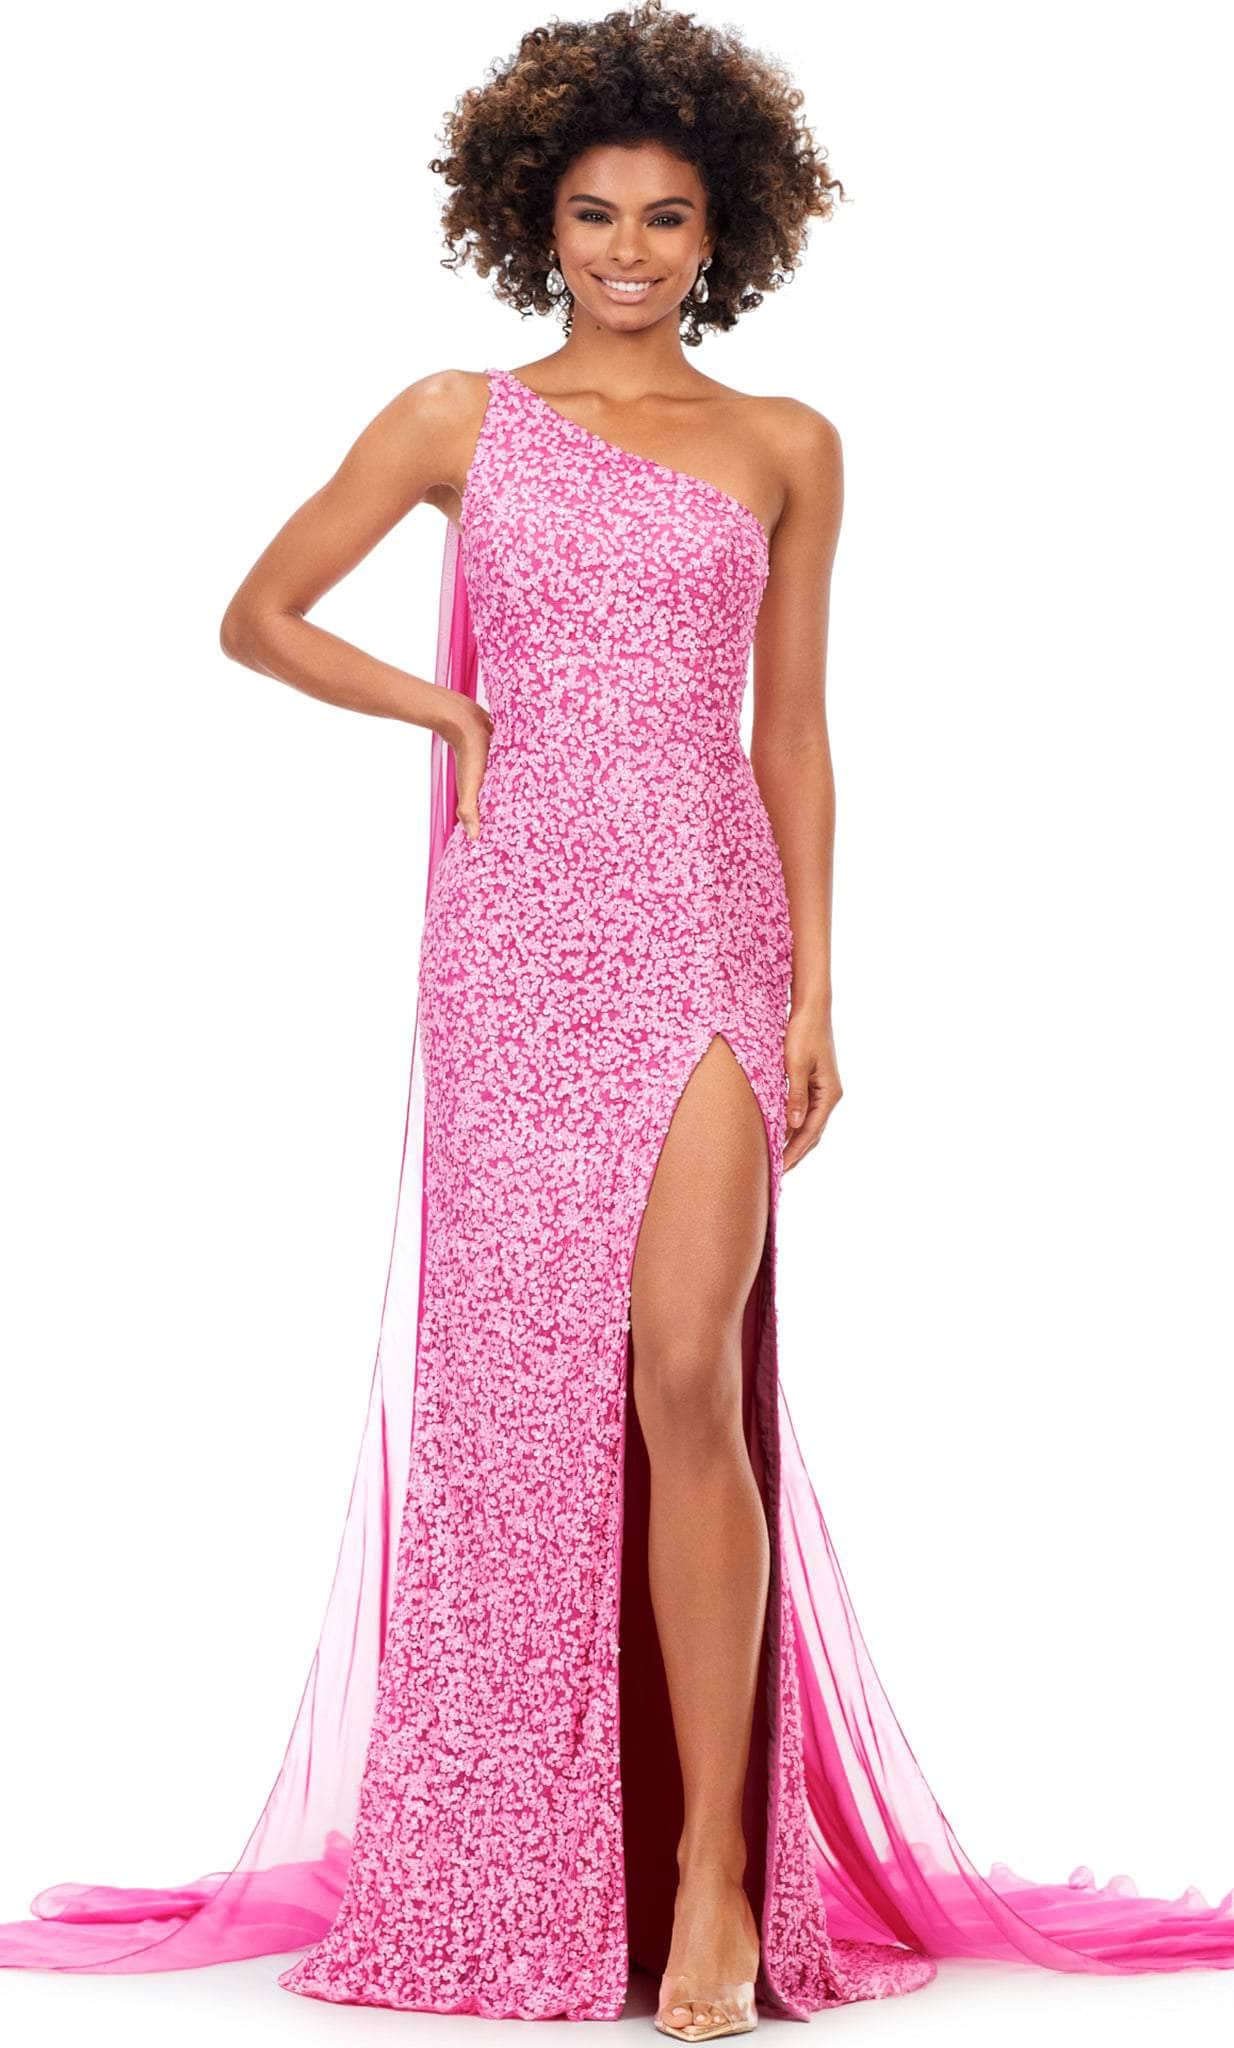 Ashley Lauren 11371 - Asymmetric Sequin Prom Gown With Cape Prom Gown 0 / Candy Pink